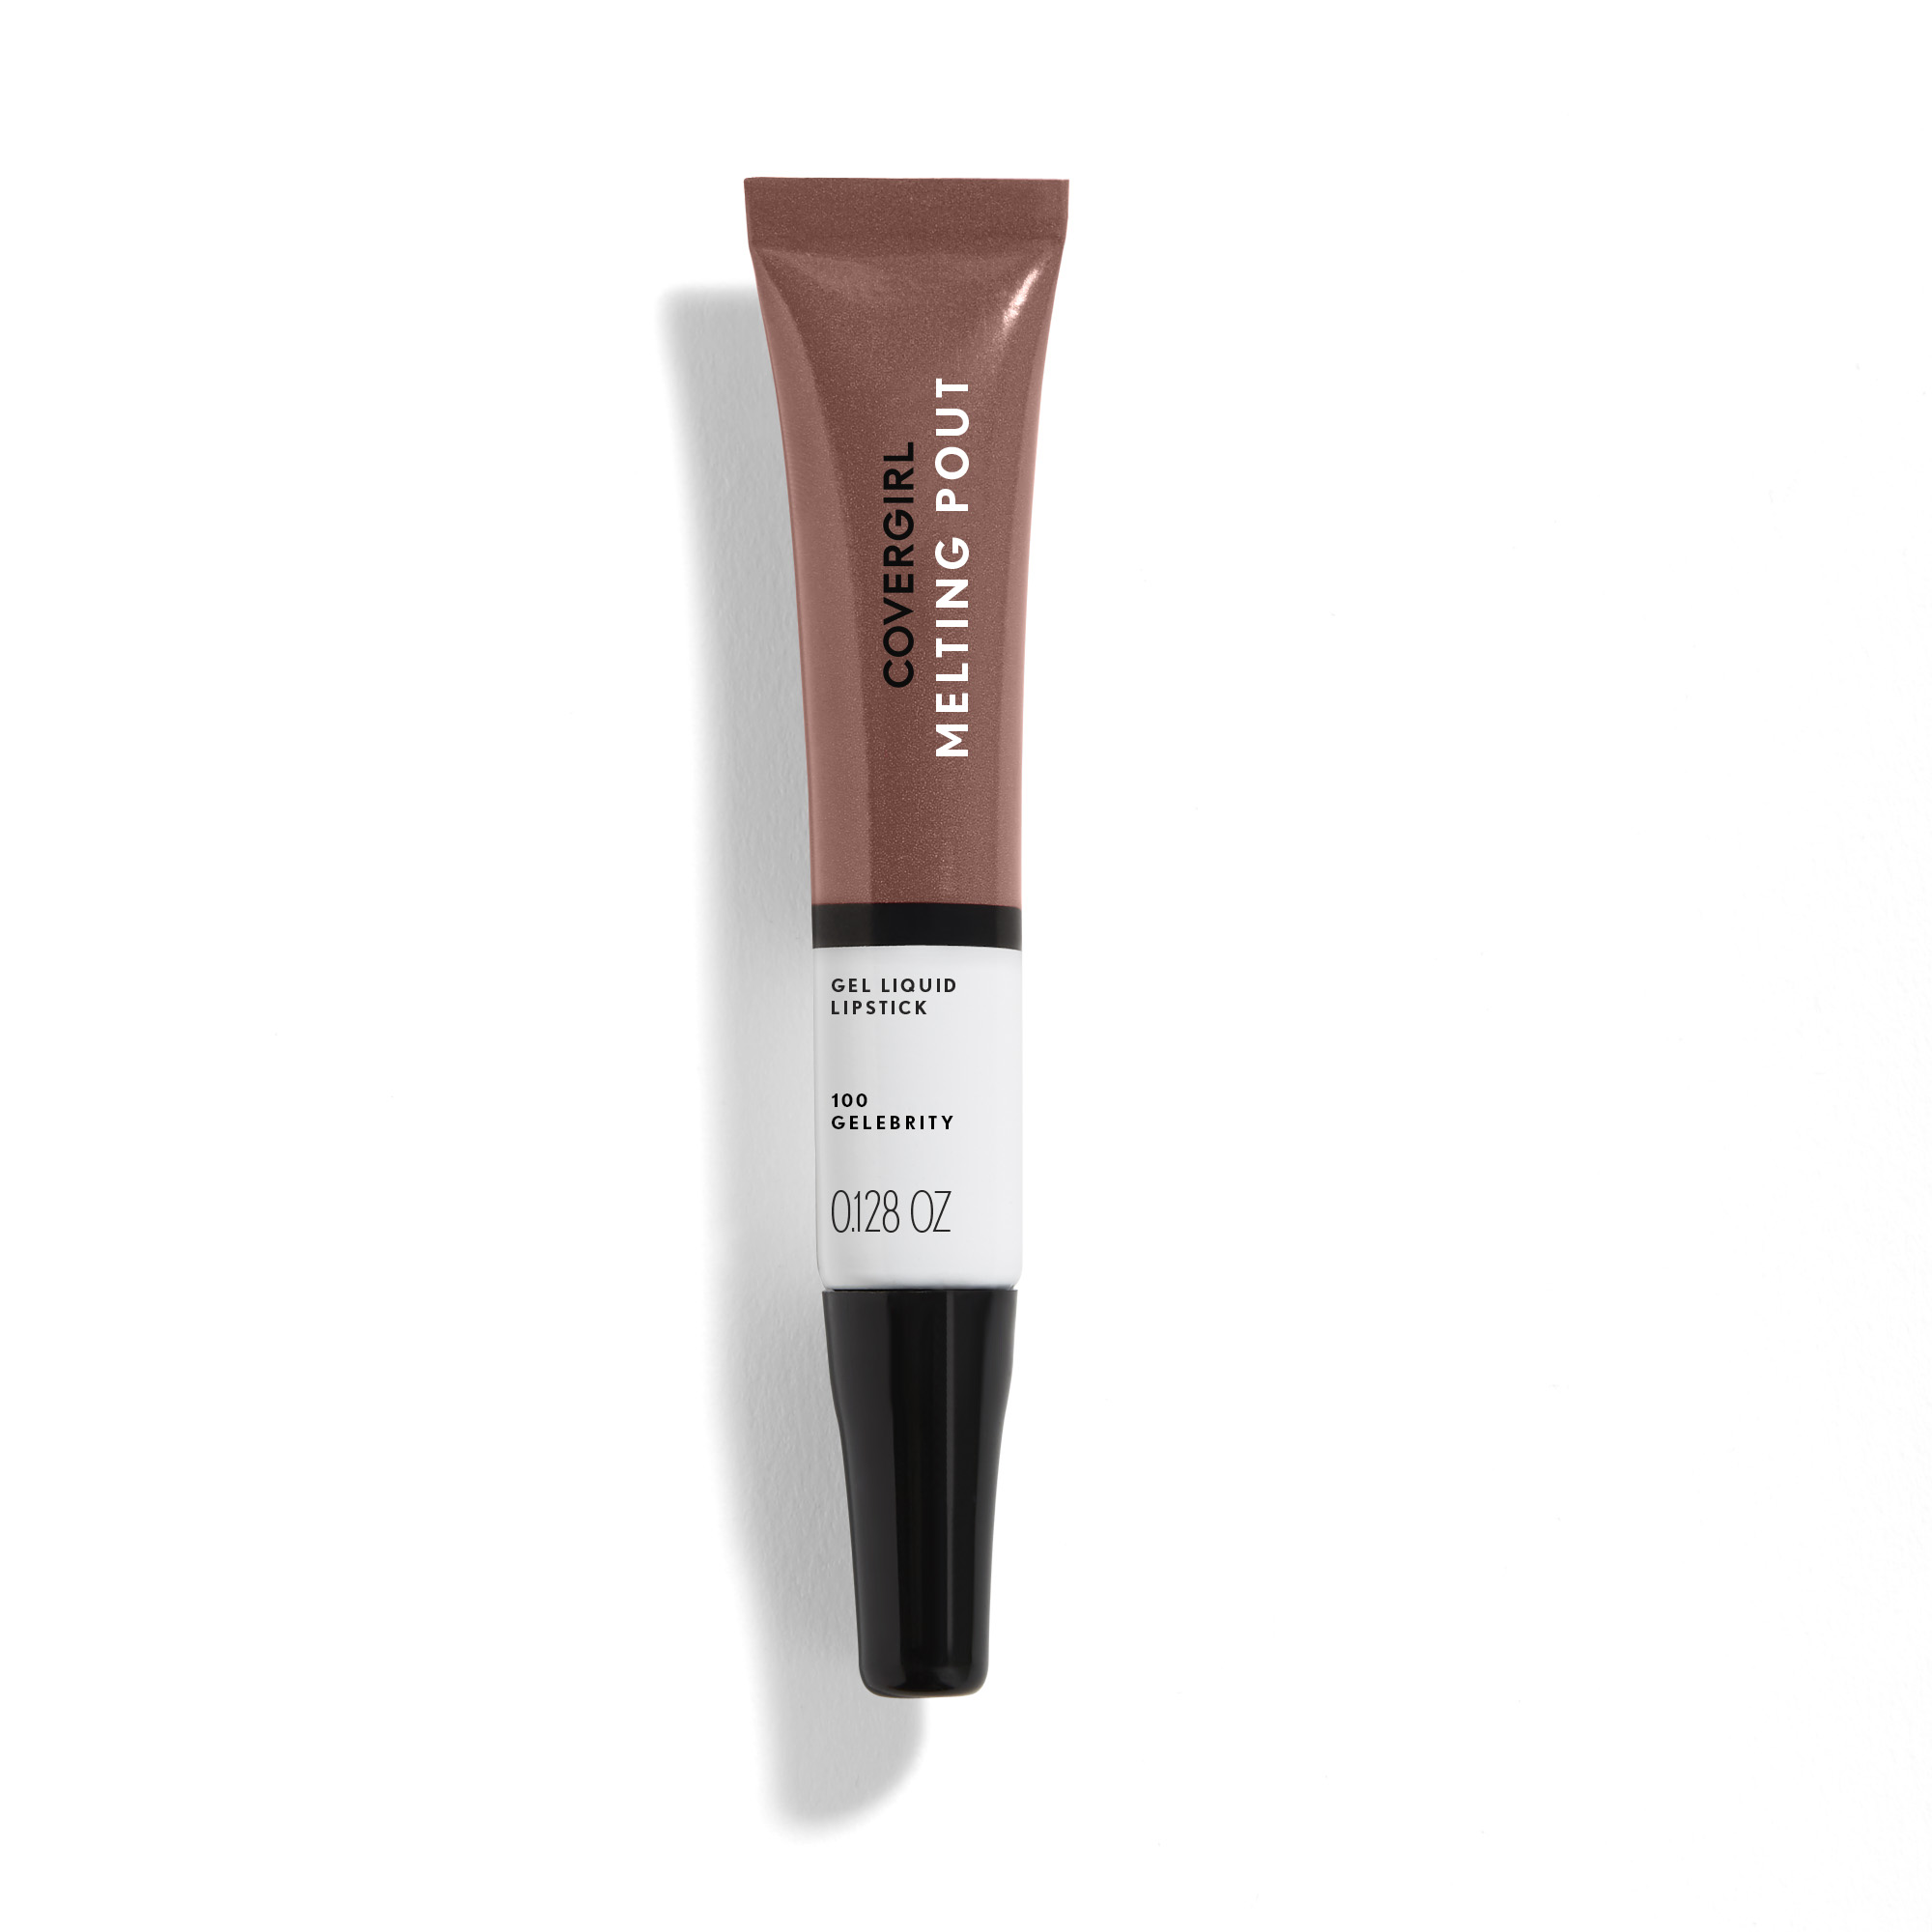 COVERGIRL Melting Pout Liquid Lipstick, 100 Gelebrity - image 1 of 3